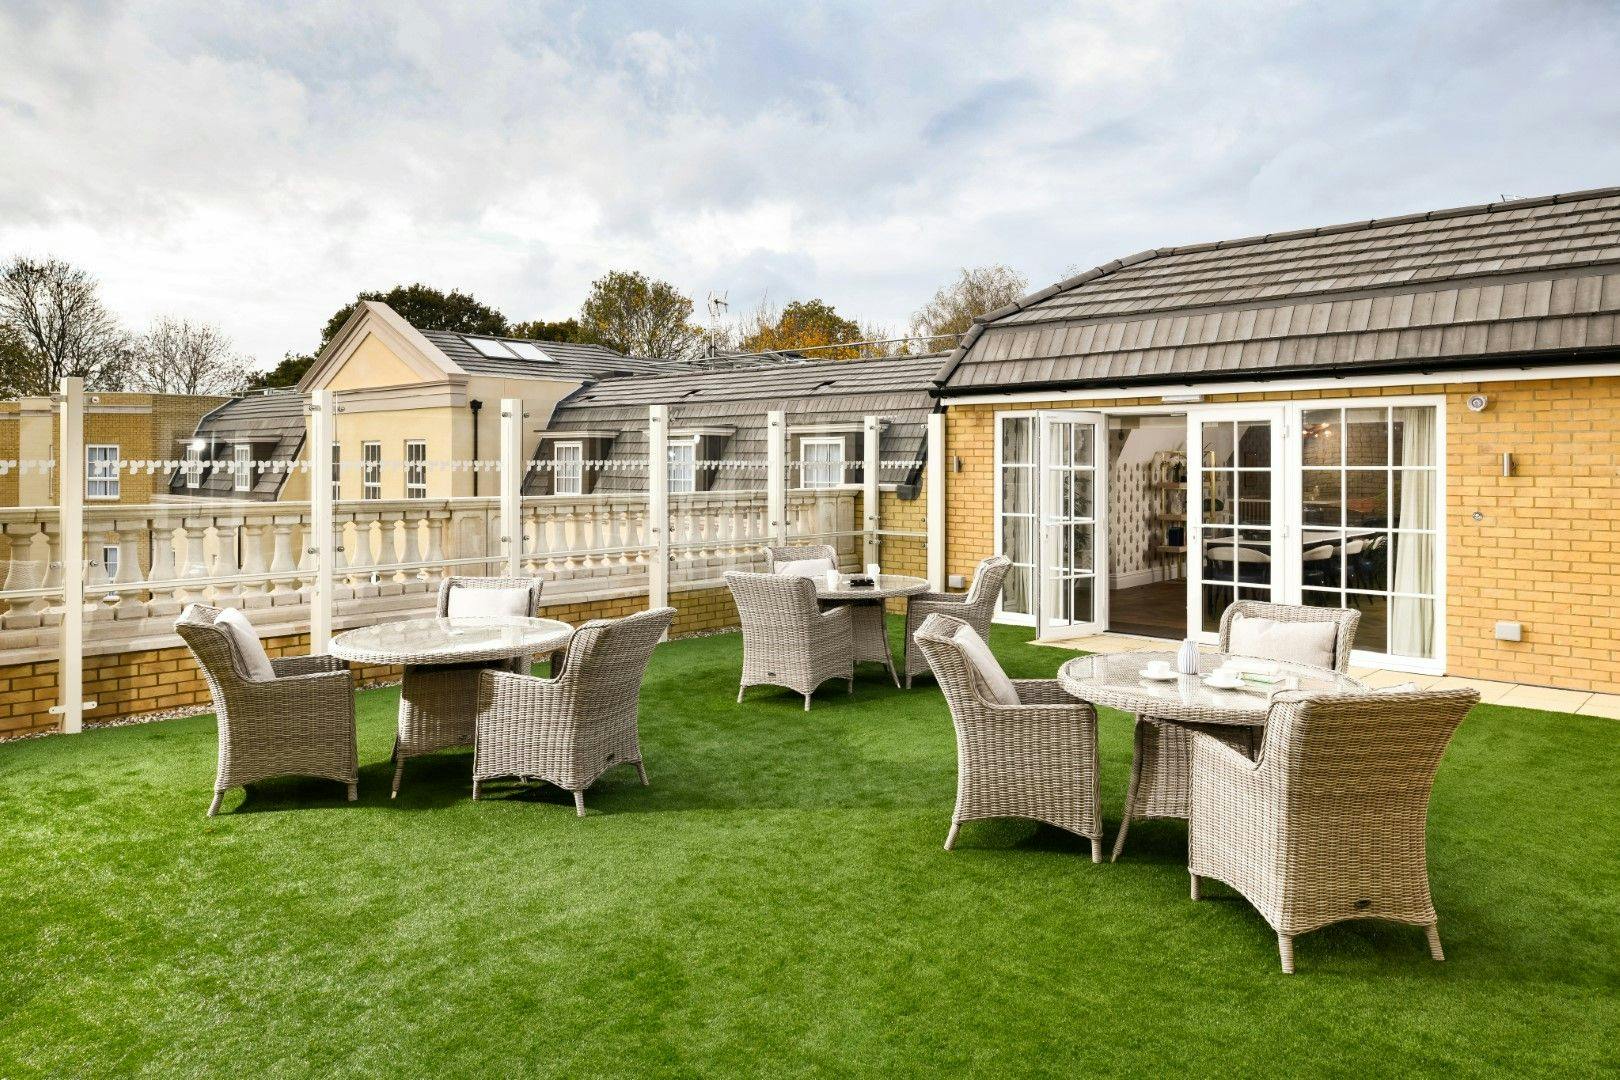 Garden at Hutton View Care Home in Brentwood, Essex